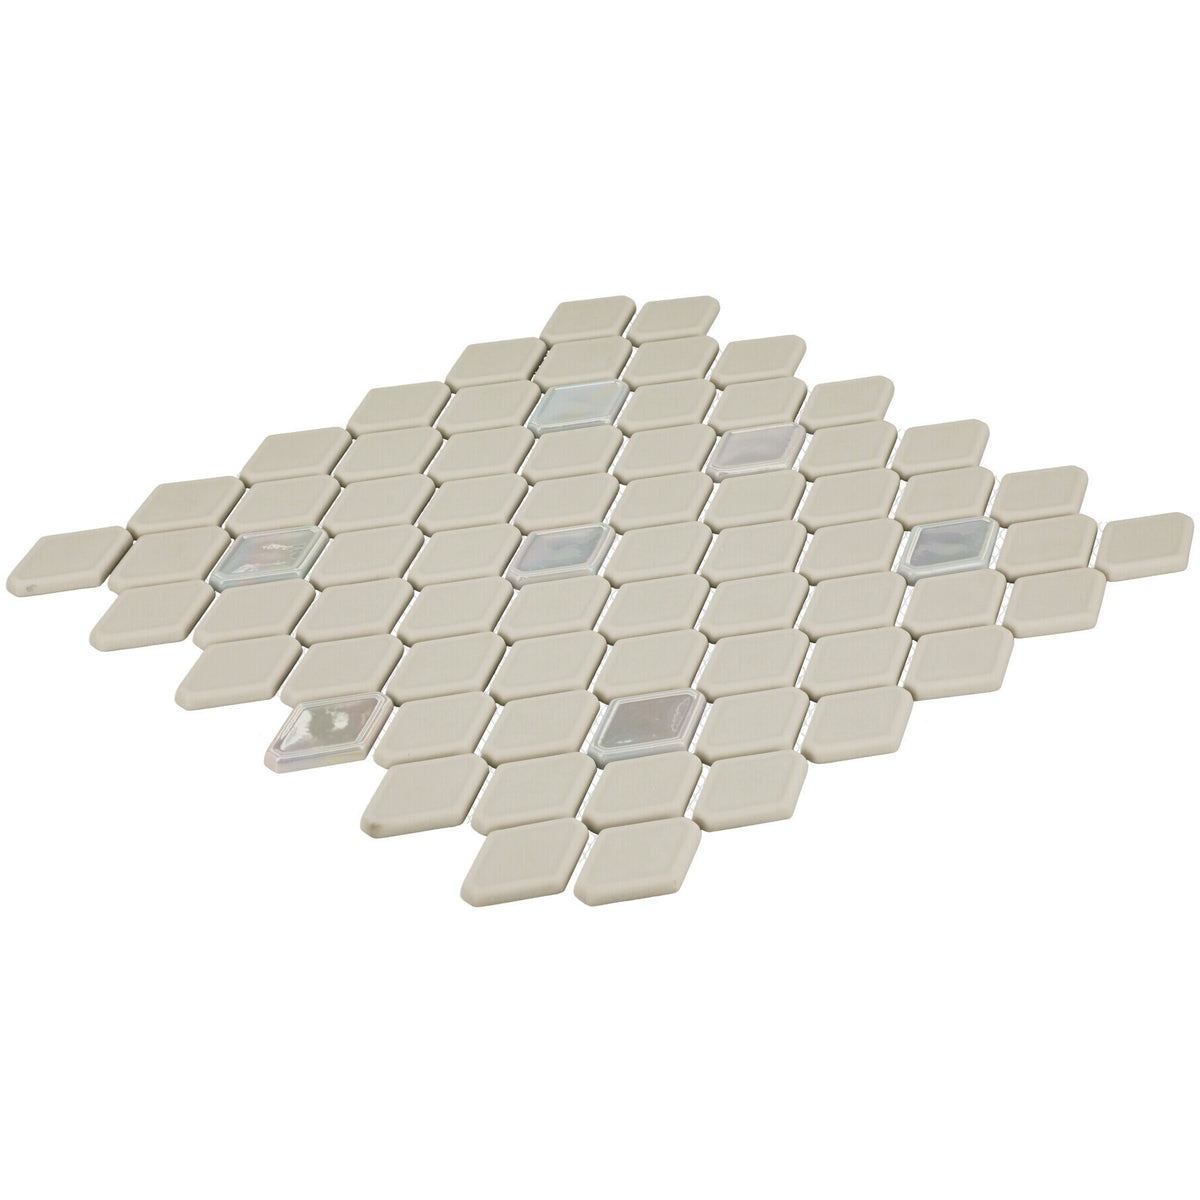 Daltile - Starcastle Glass Elongated Hexagon Mosaic - Comet Angled View